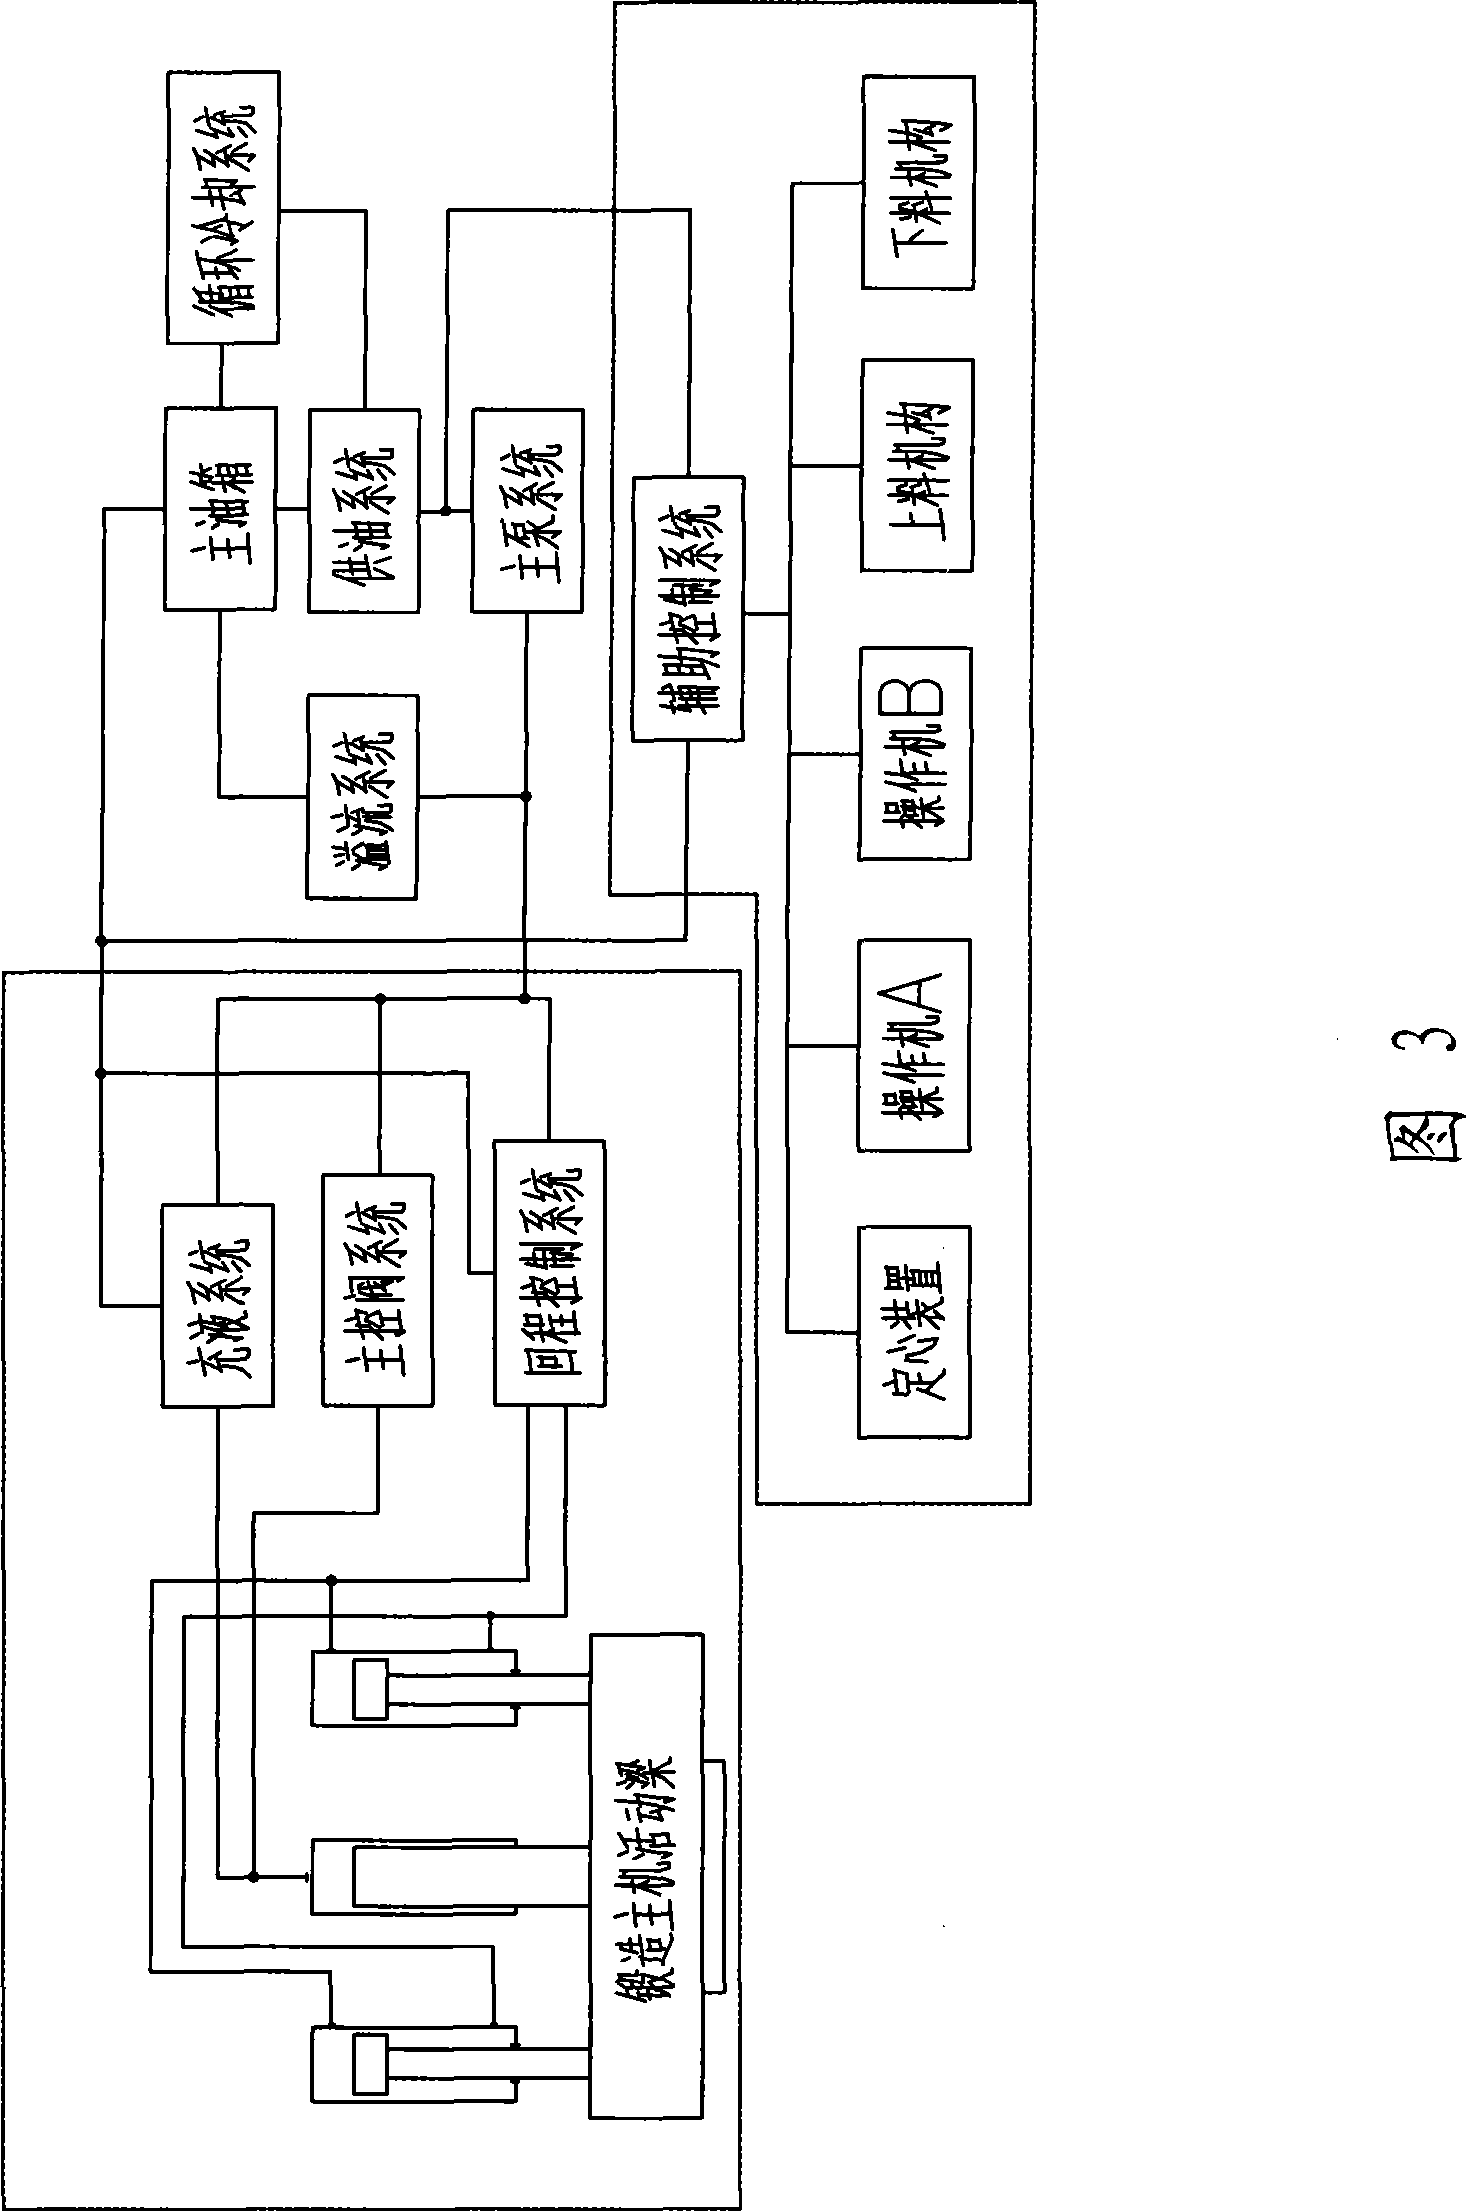 Special free-forging hydraulic unit and use method thereof